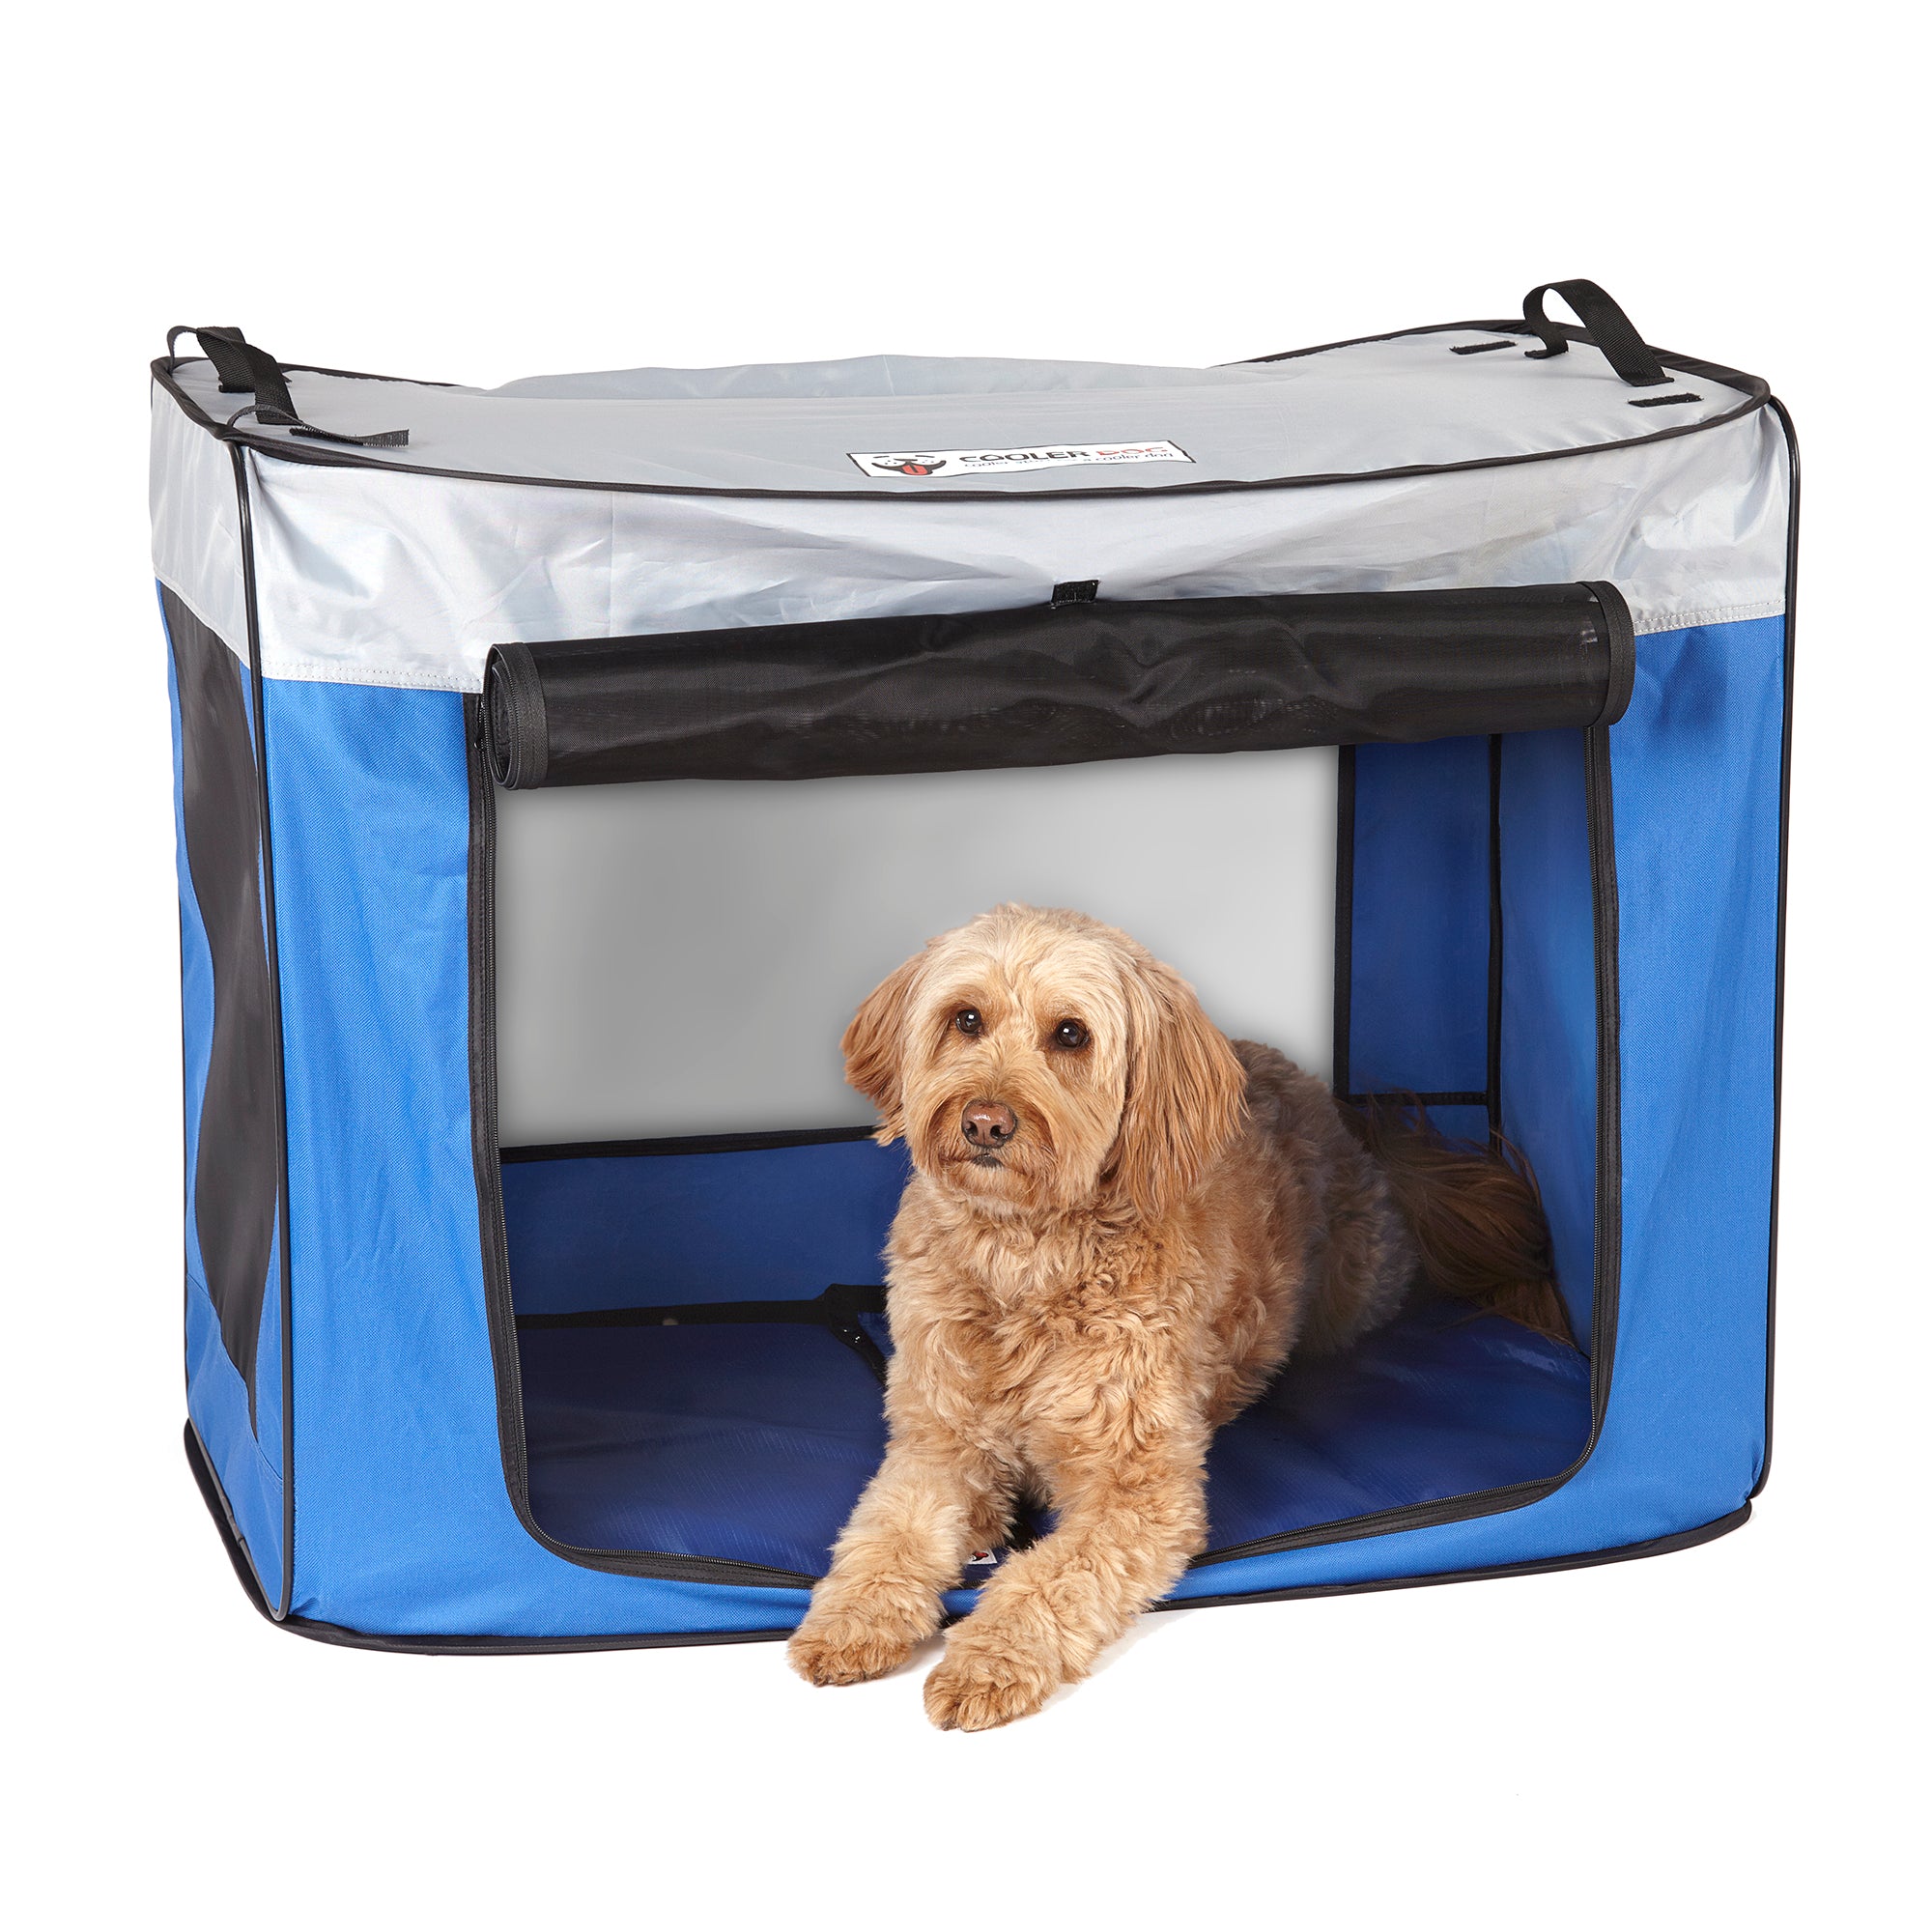 Unfolded CoolerDog Pop-Up Shade Oasis, large, blue/gray, with 2 CoolerDog Hydro Cooling Mat inside